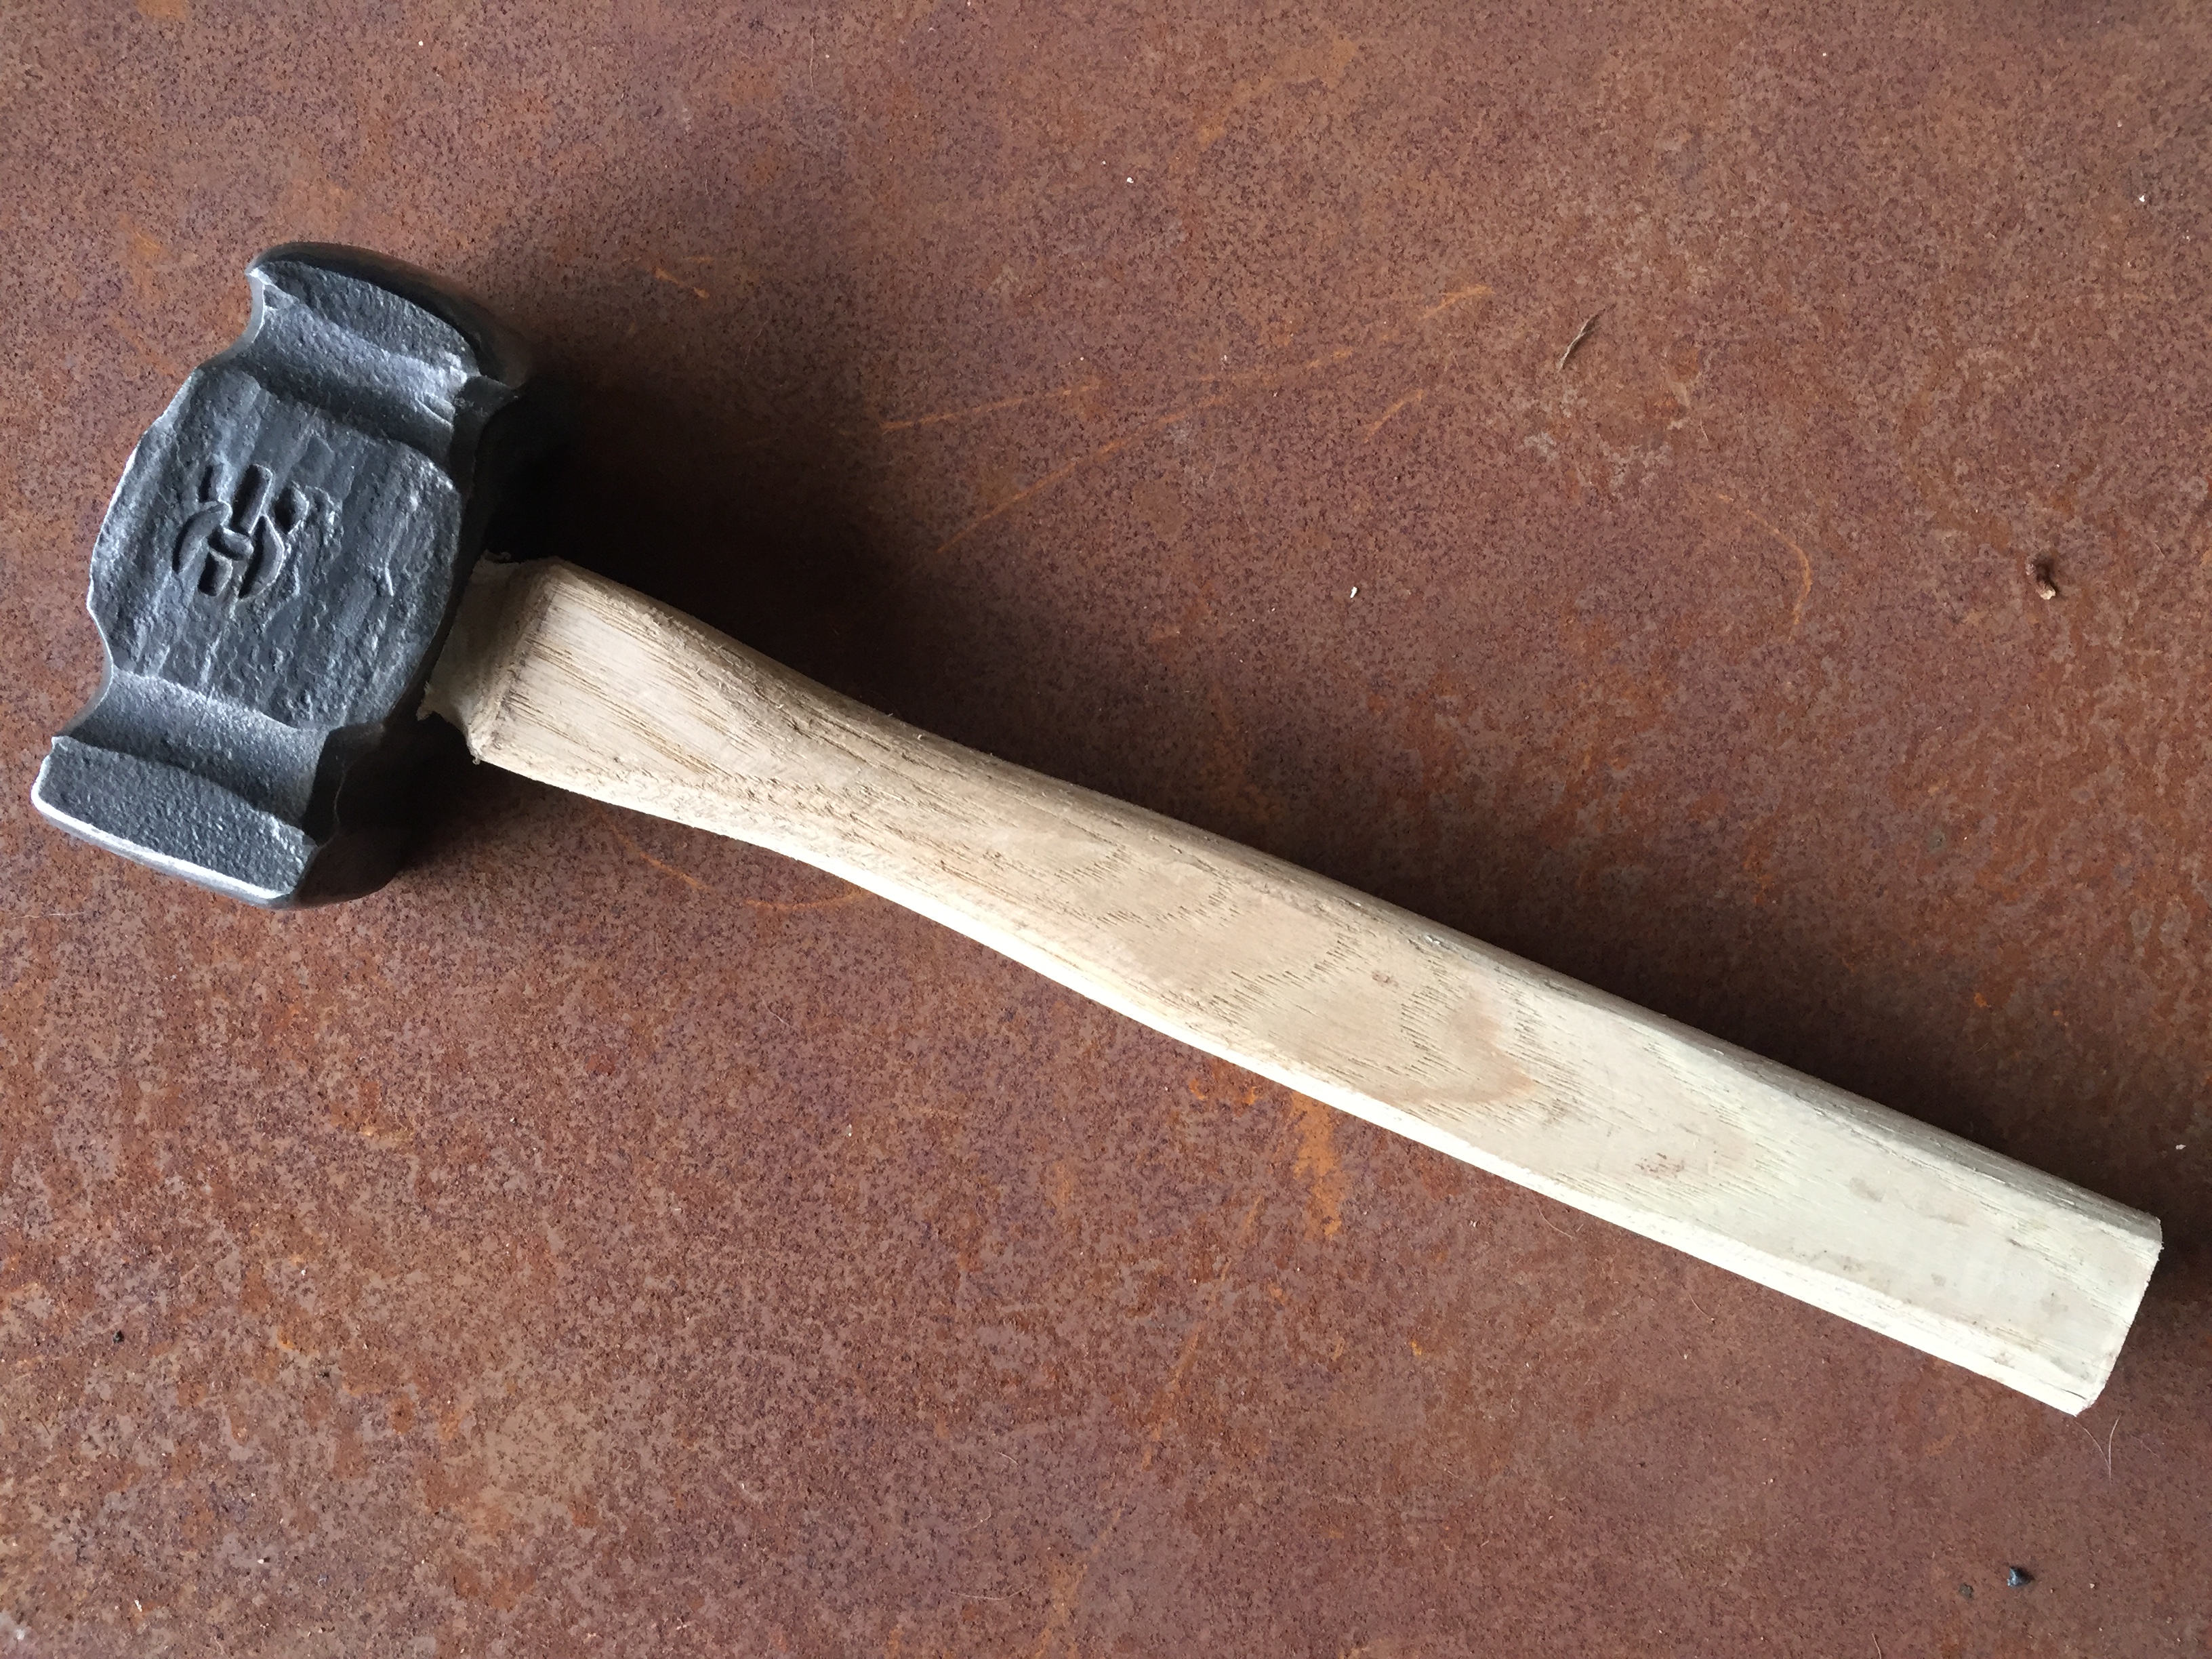 Hammer Handle Designs and Problems - Hand Hammers - I Forge Iron